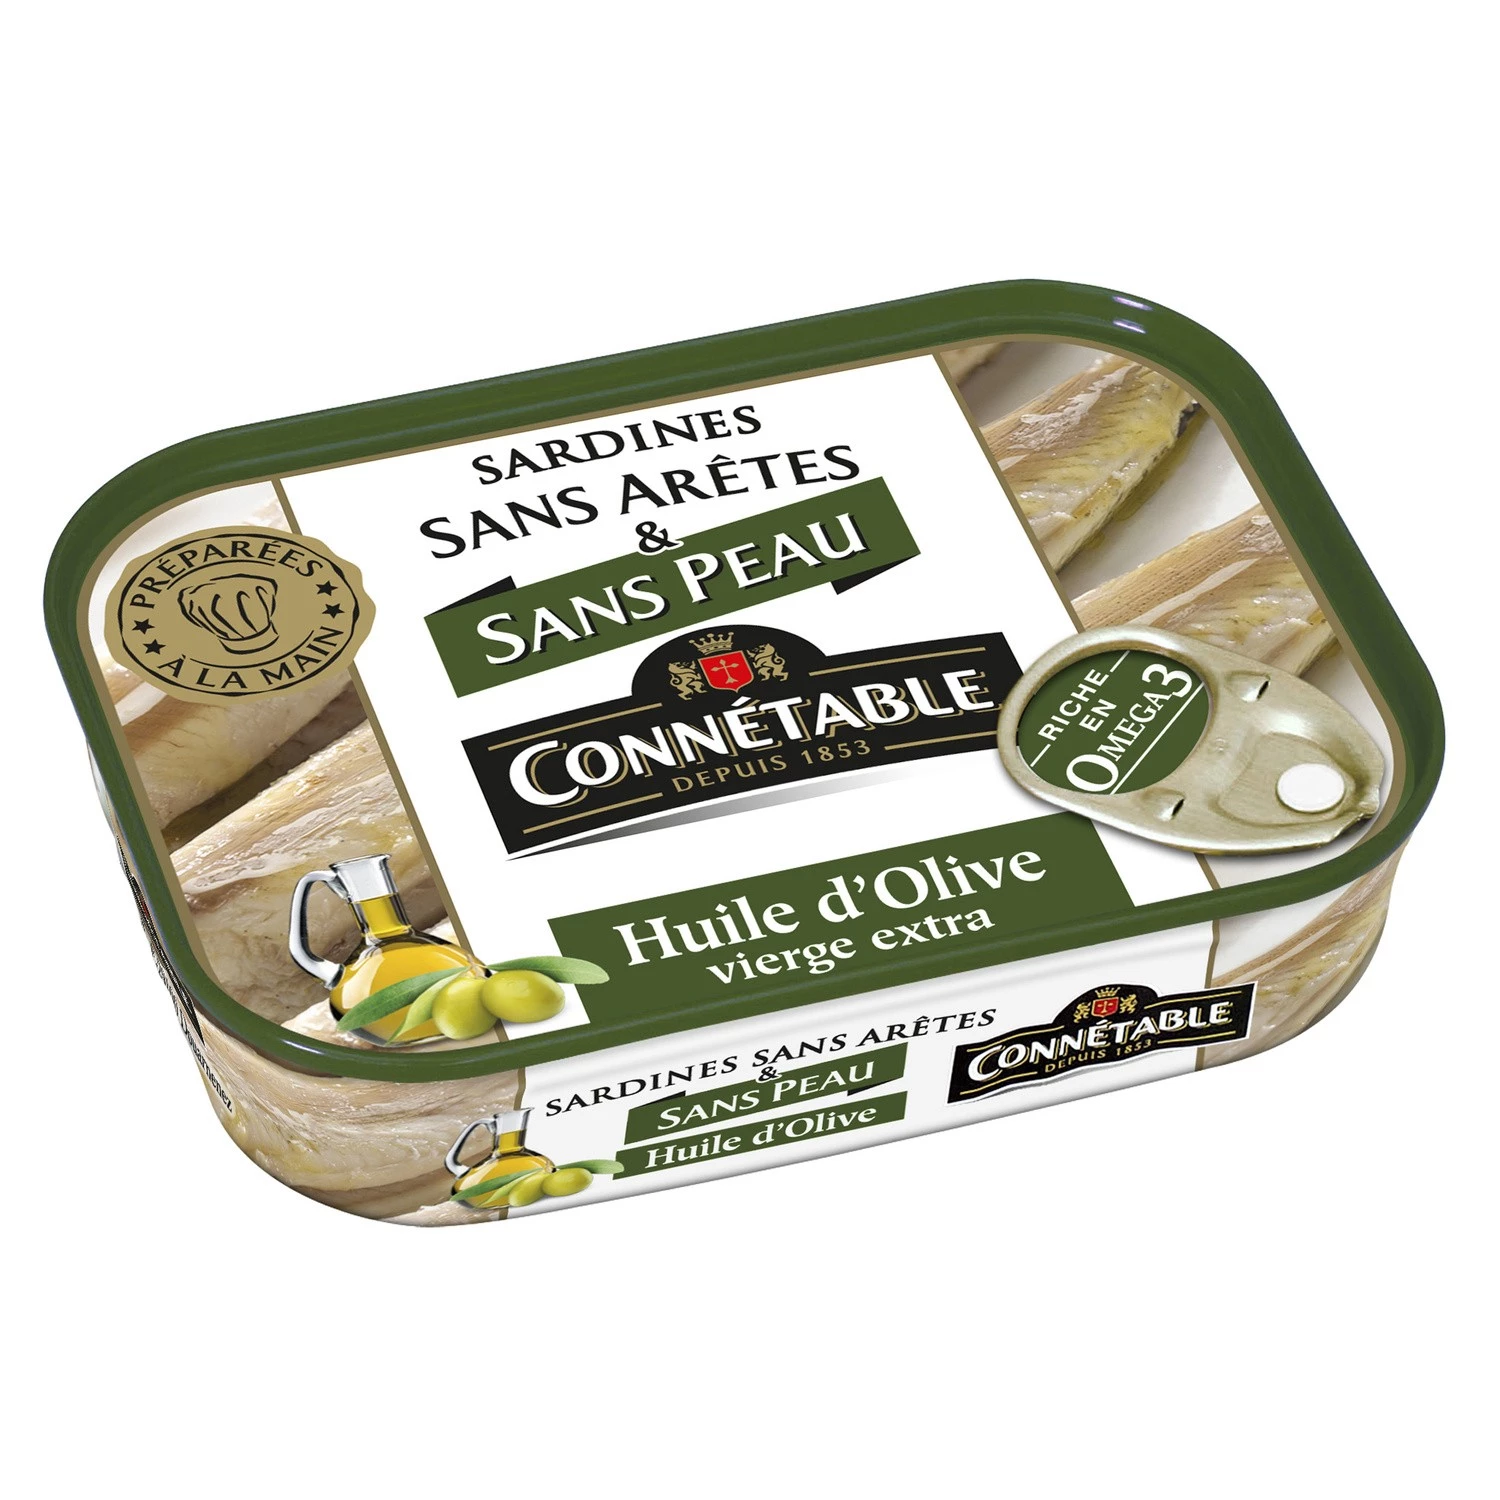 Sardines in Extra Virgin Olive Oil, Skinless and Boneless, 140g -CONNÉTABLE